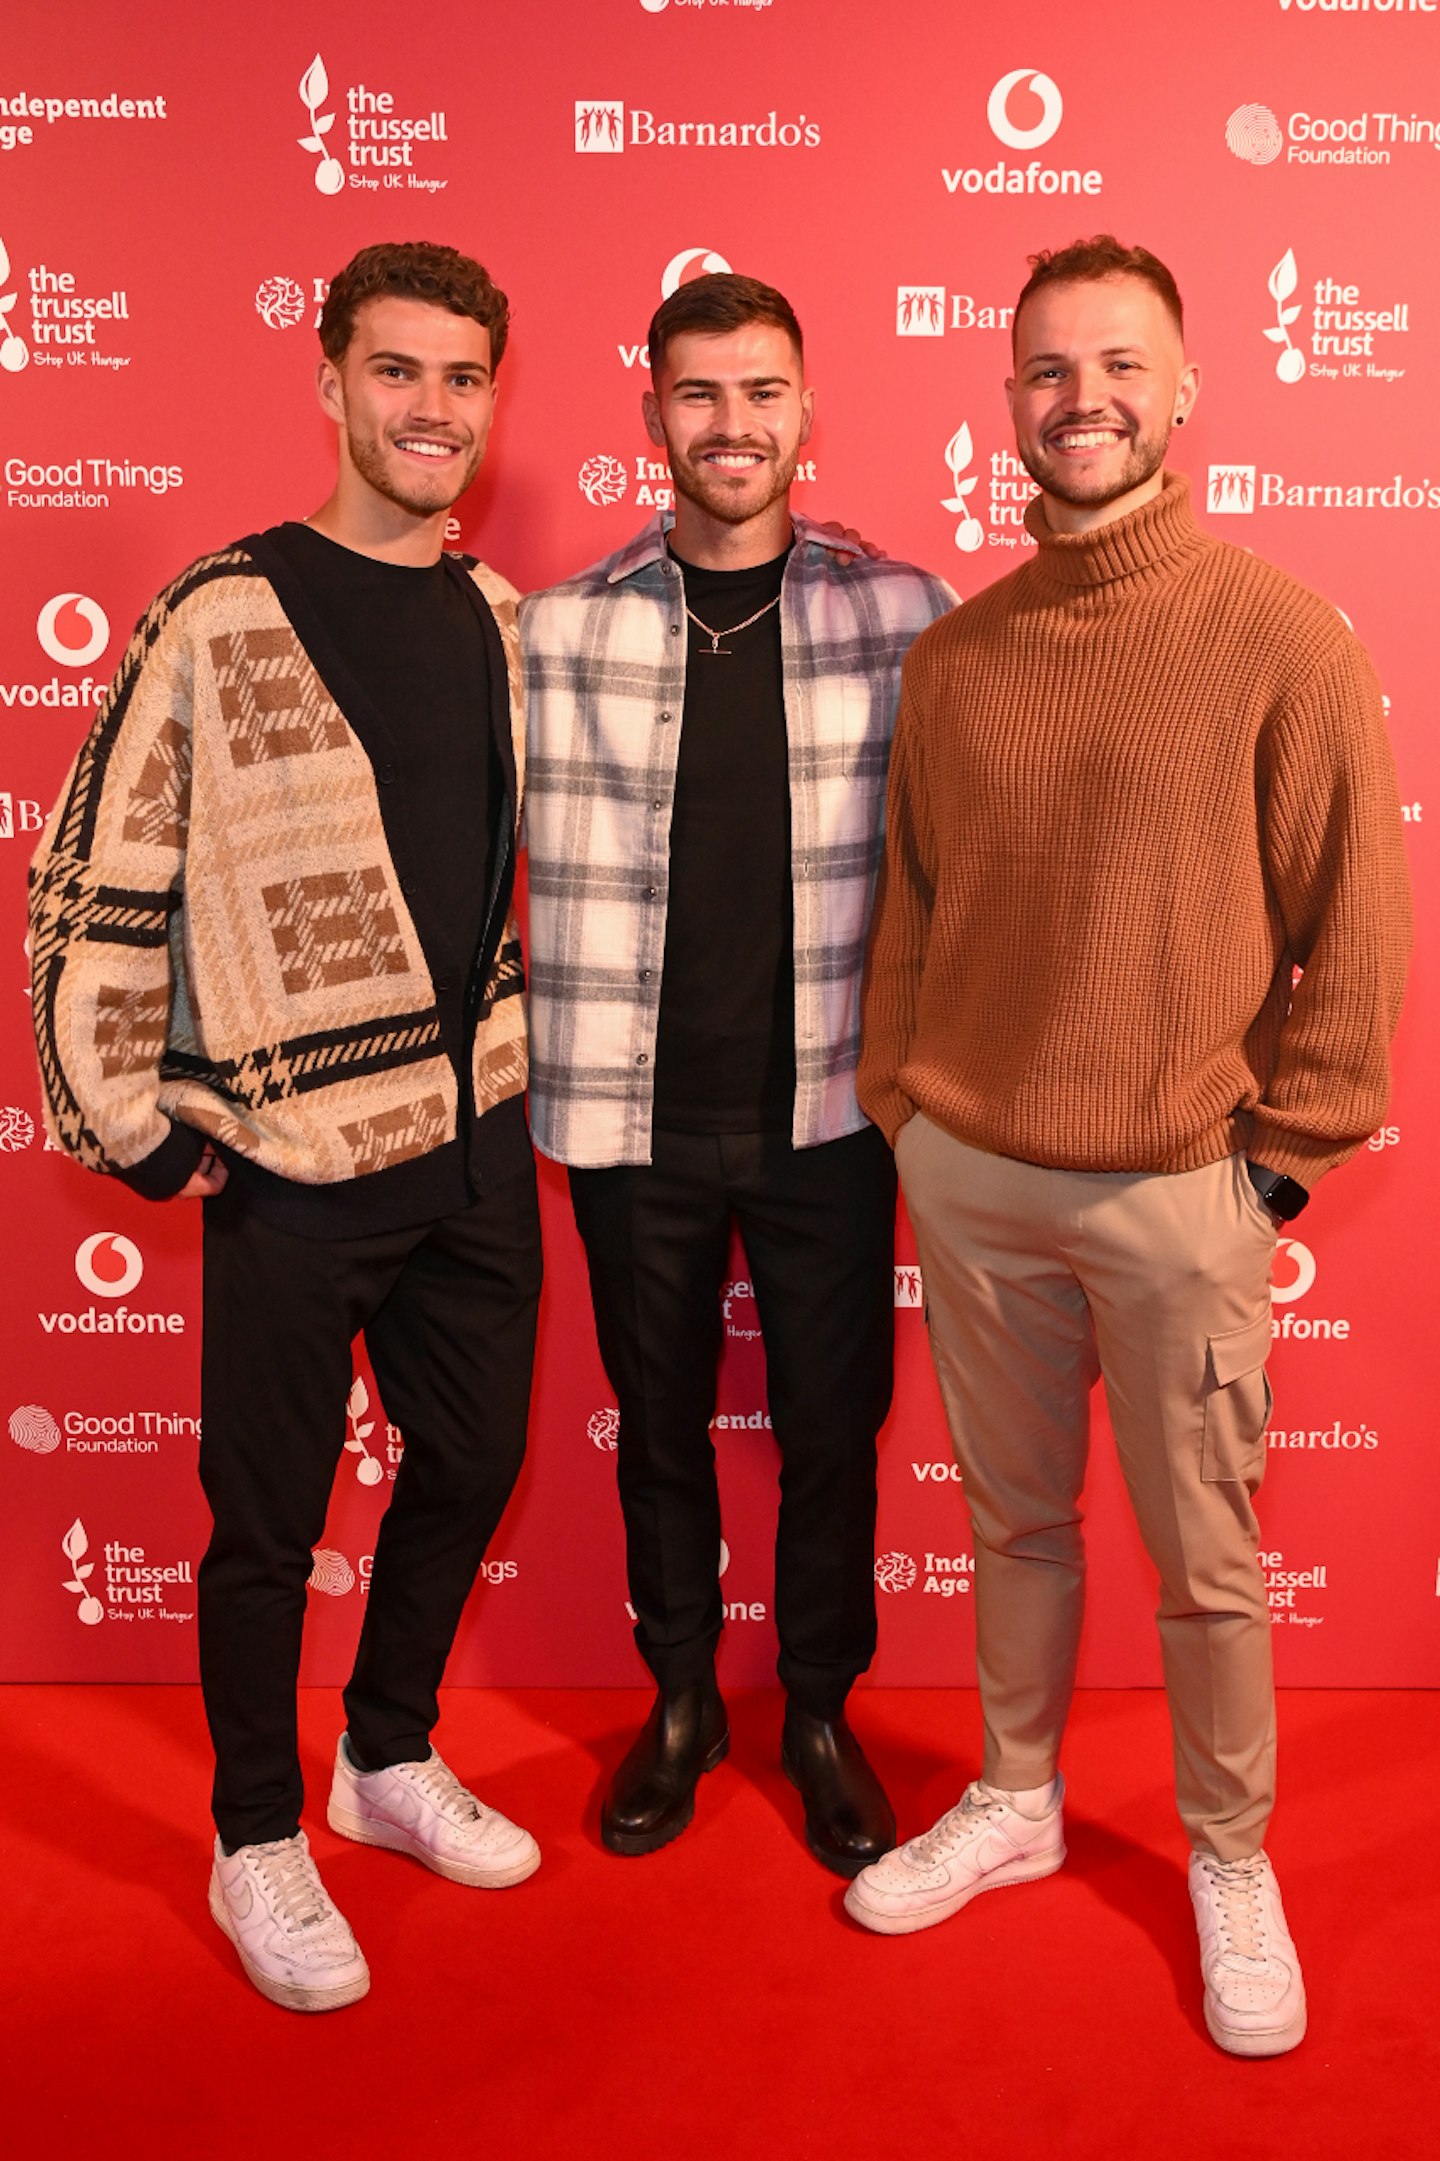 Owen Warner posing on a red carpet with his brother Jake and Louie